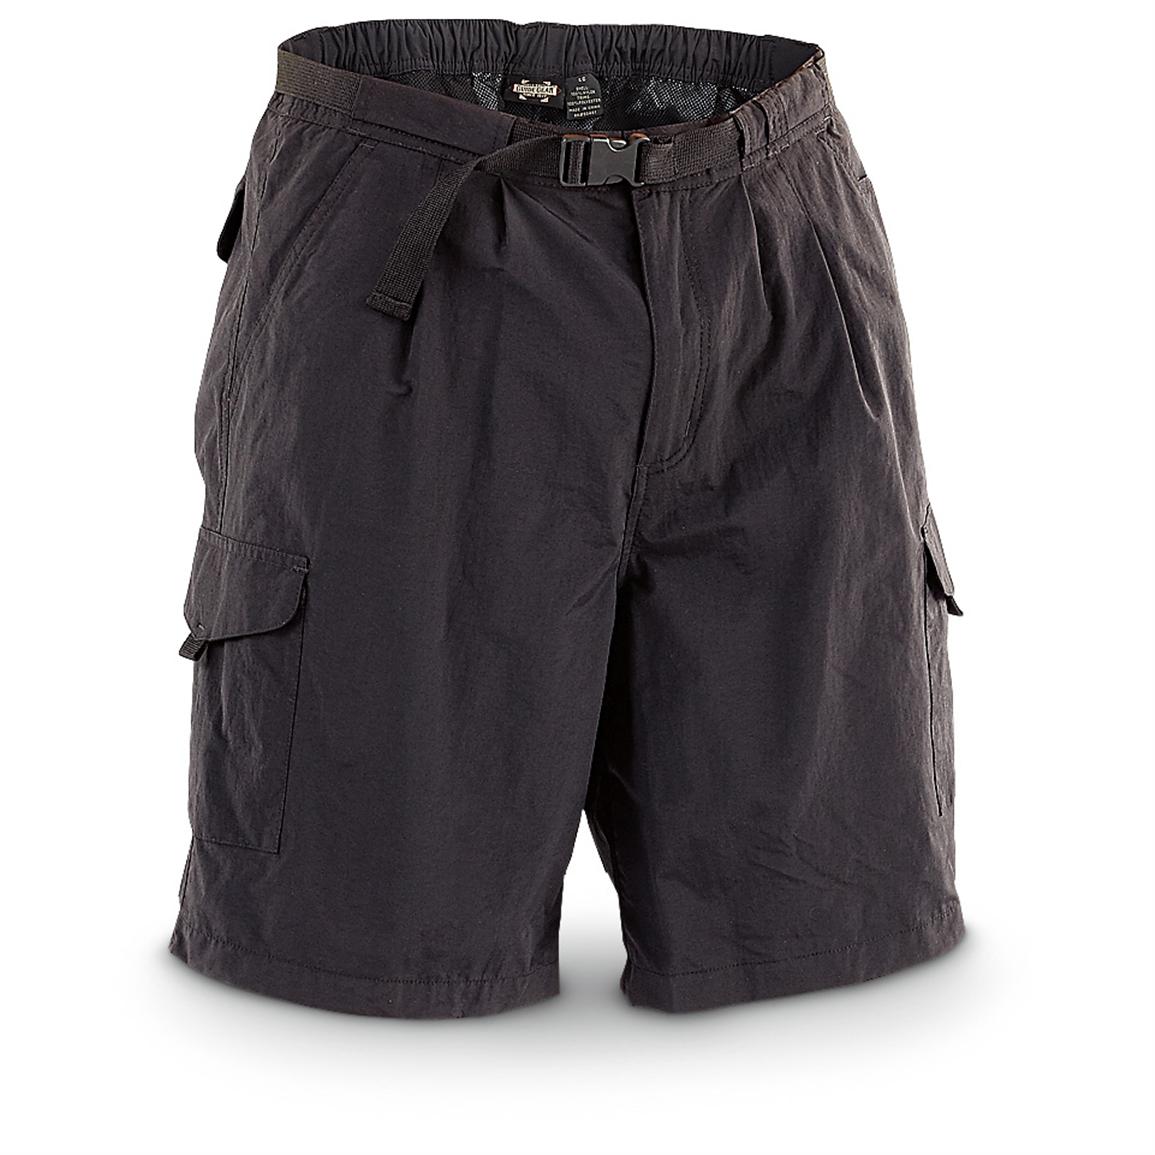 Guide Gear Men S Cargo River Shorts 210833 Shorts At Sportsman S Guide